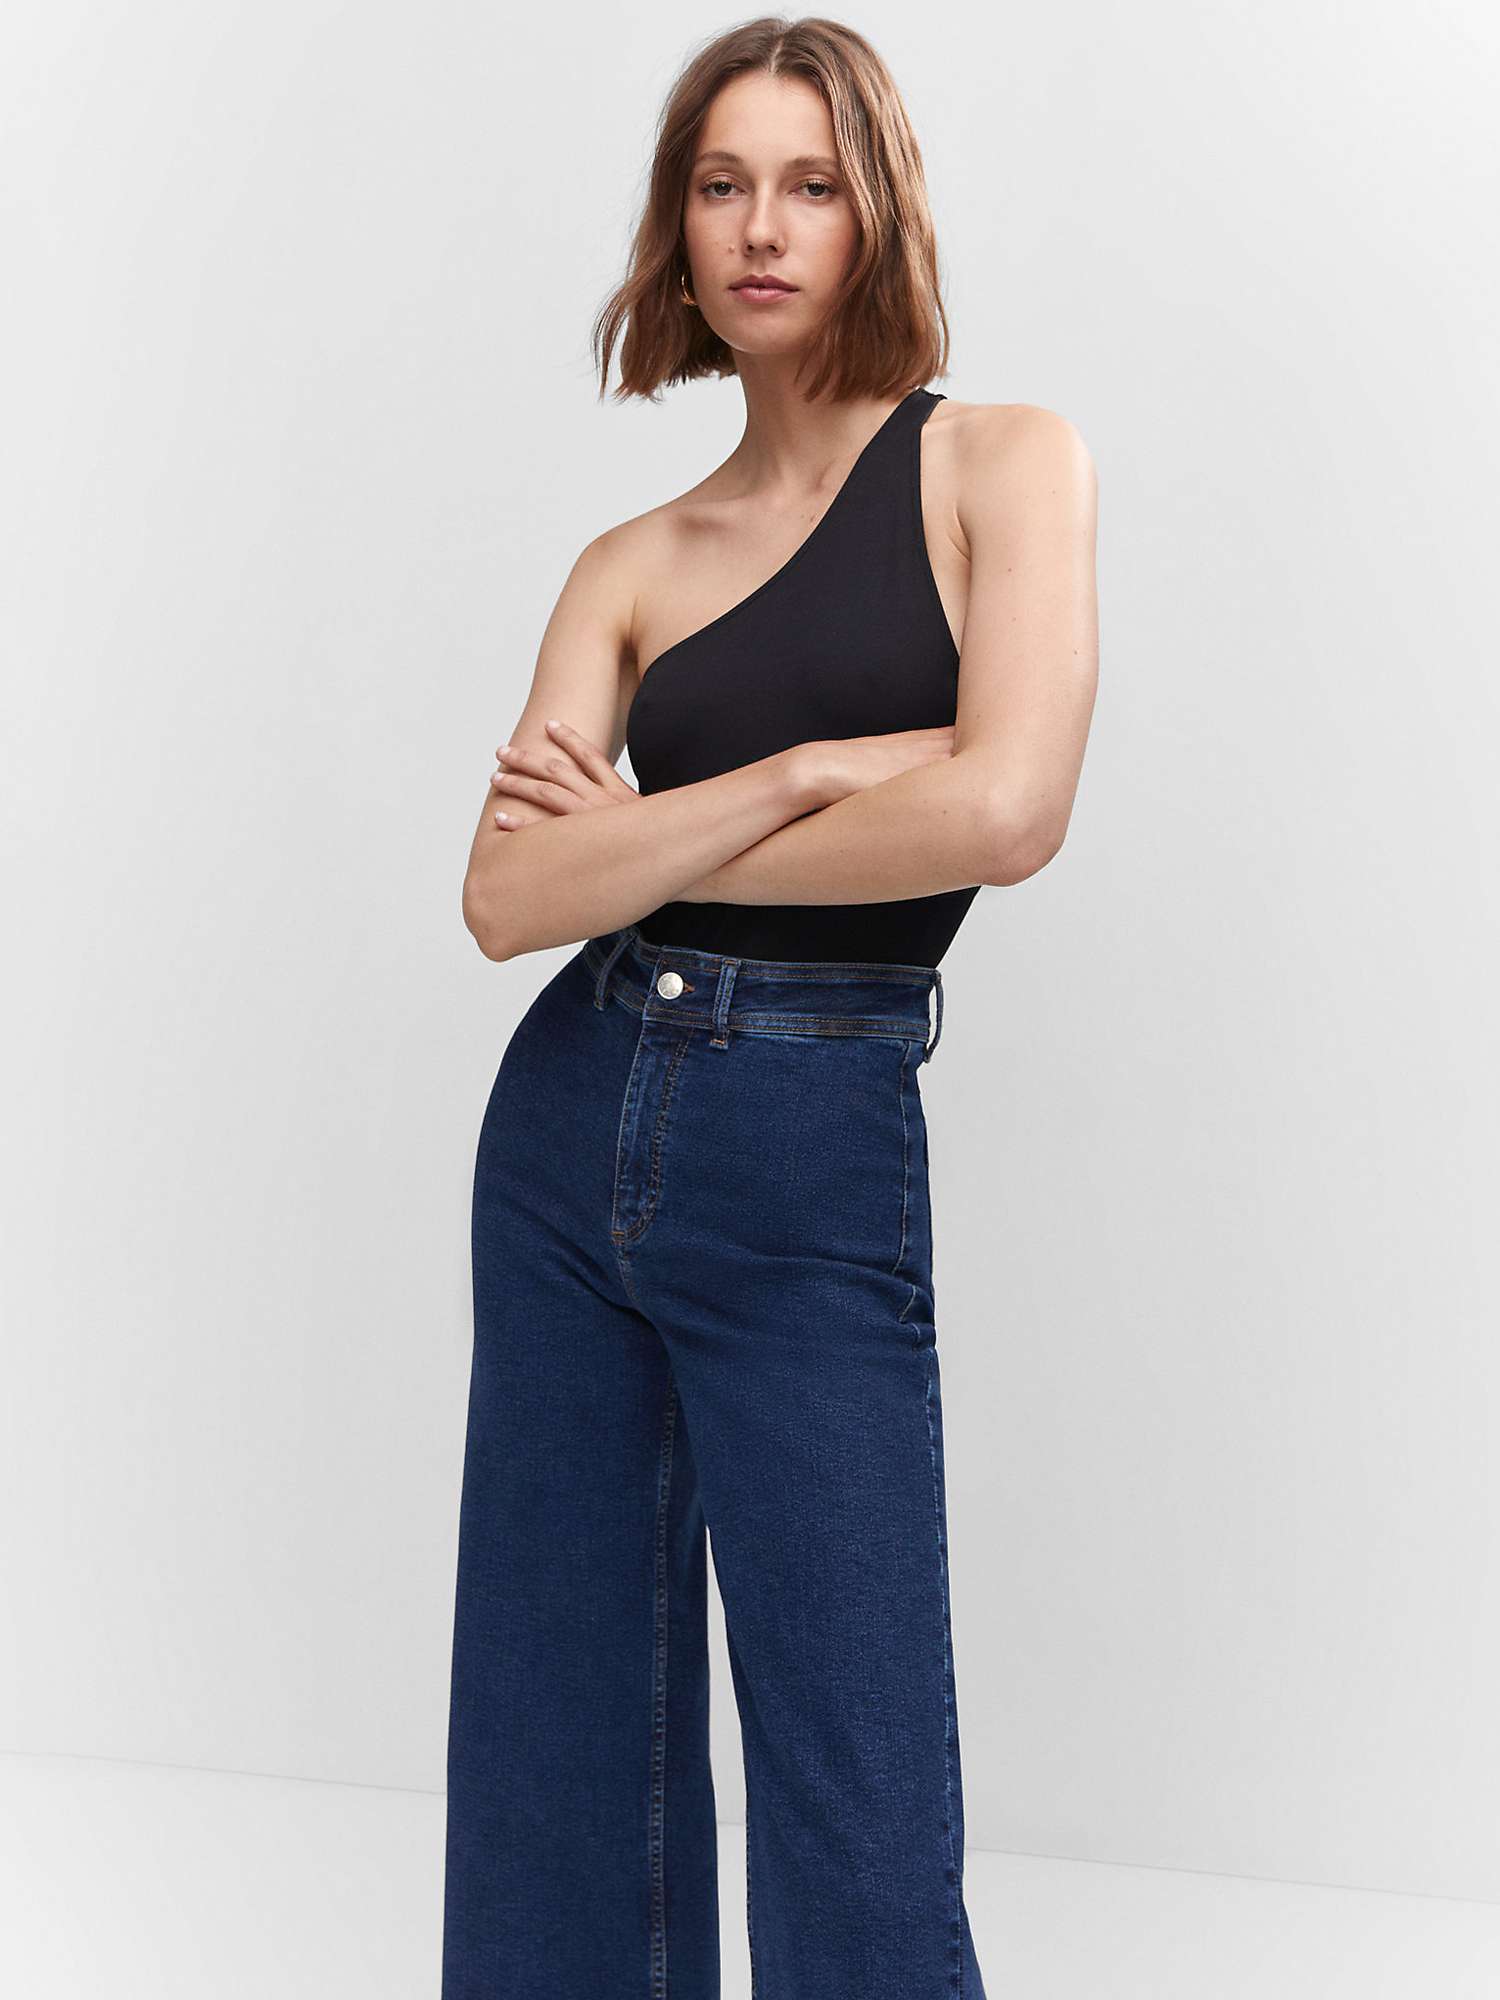 Buy Mango Catherin Jeans Culotte High Waist Online at johnlewis.com